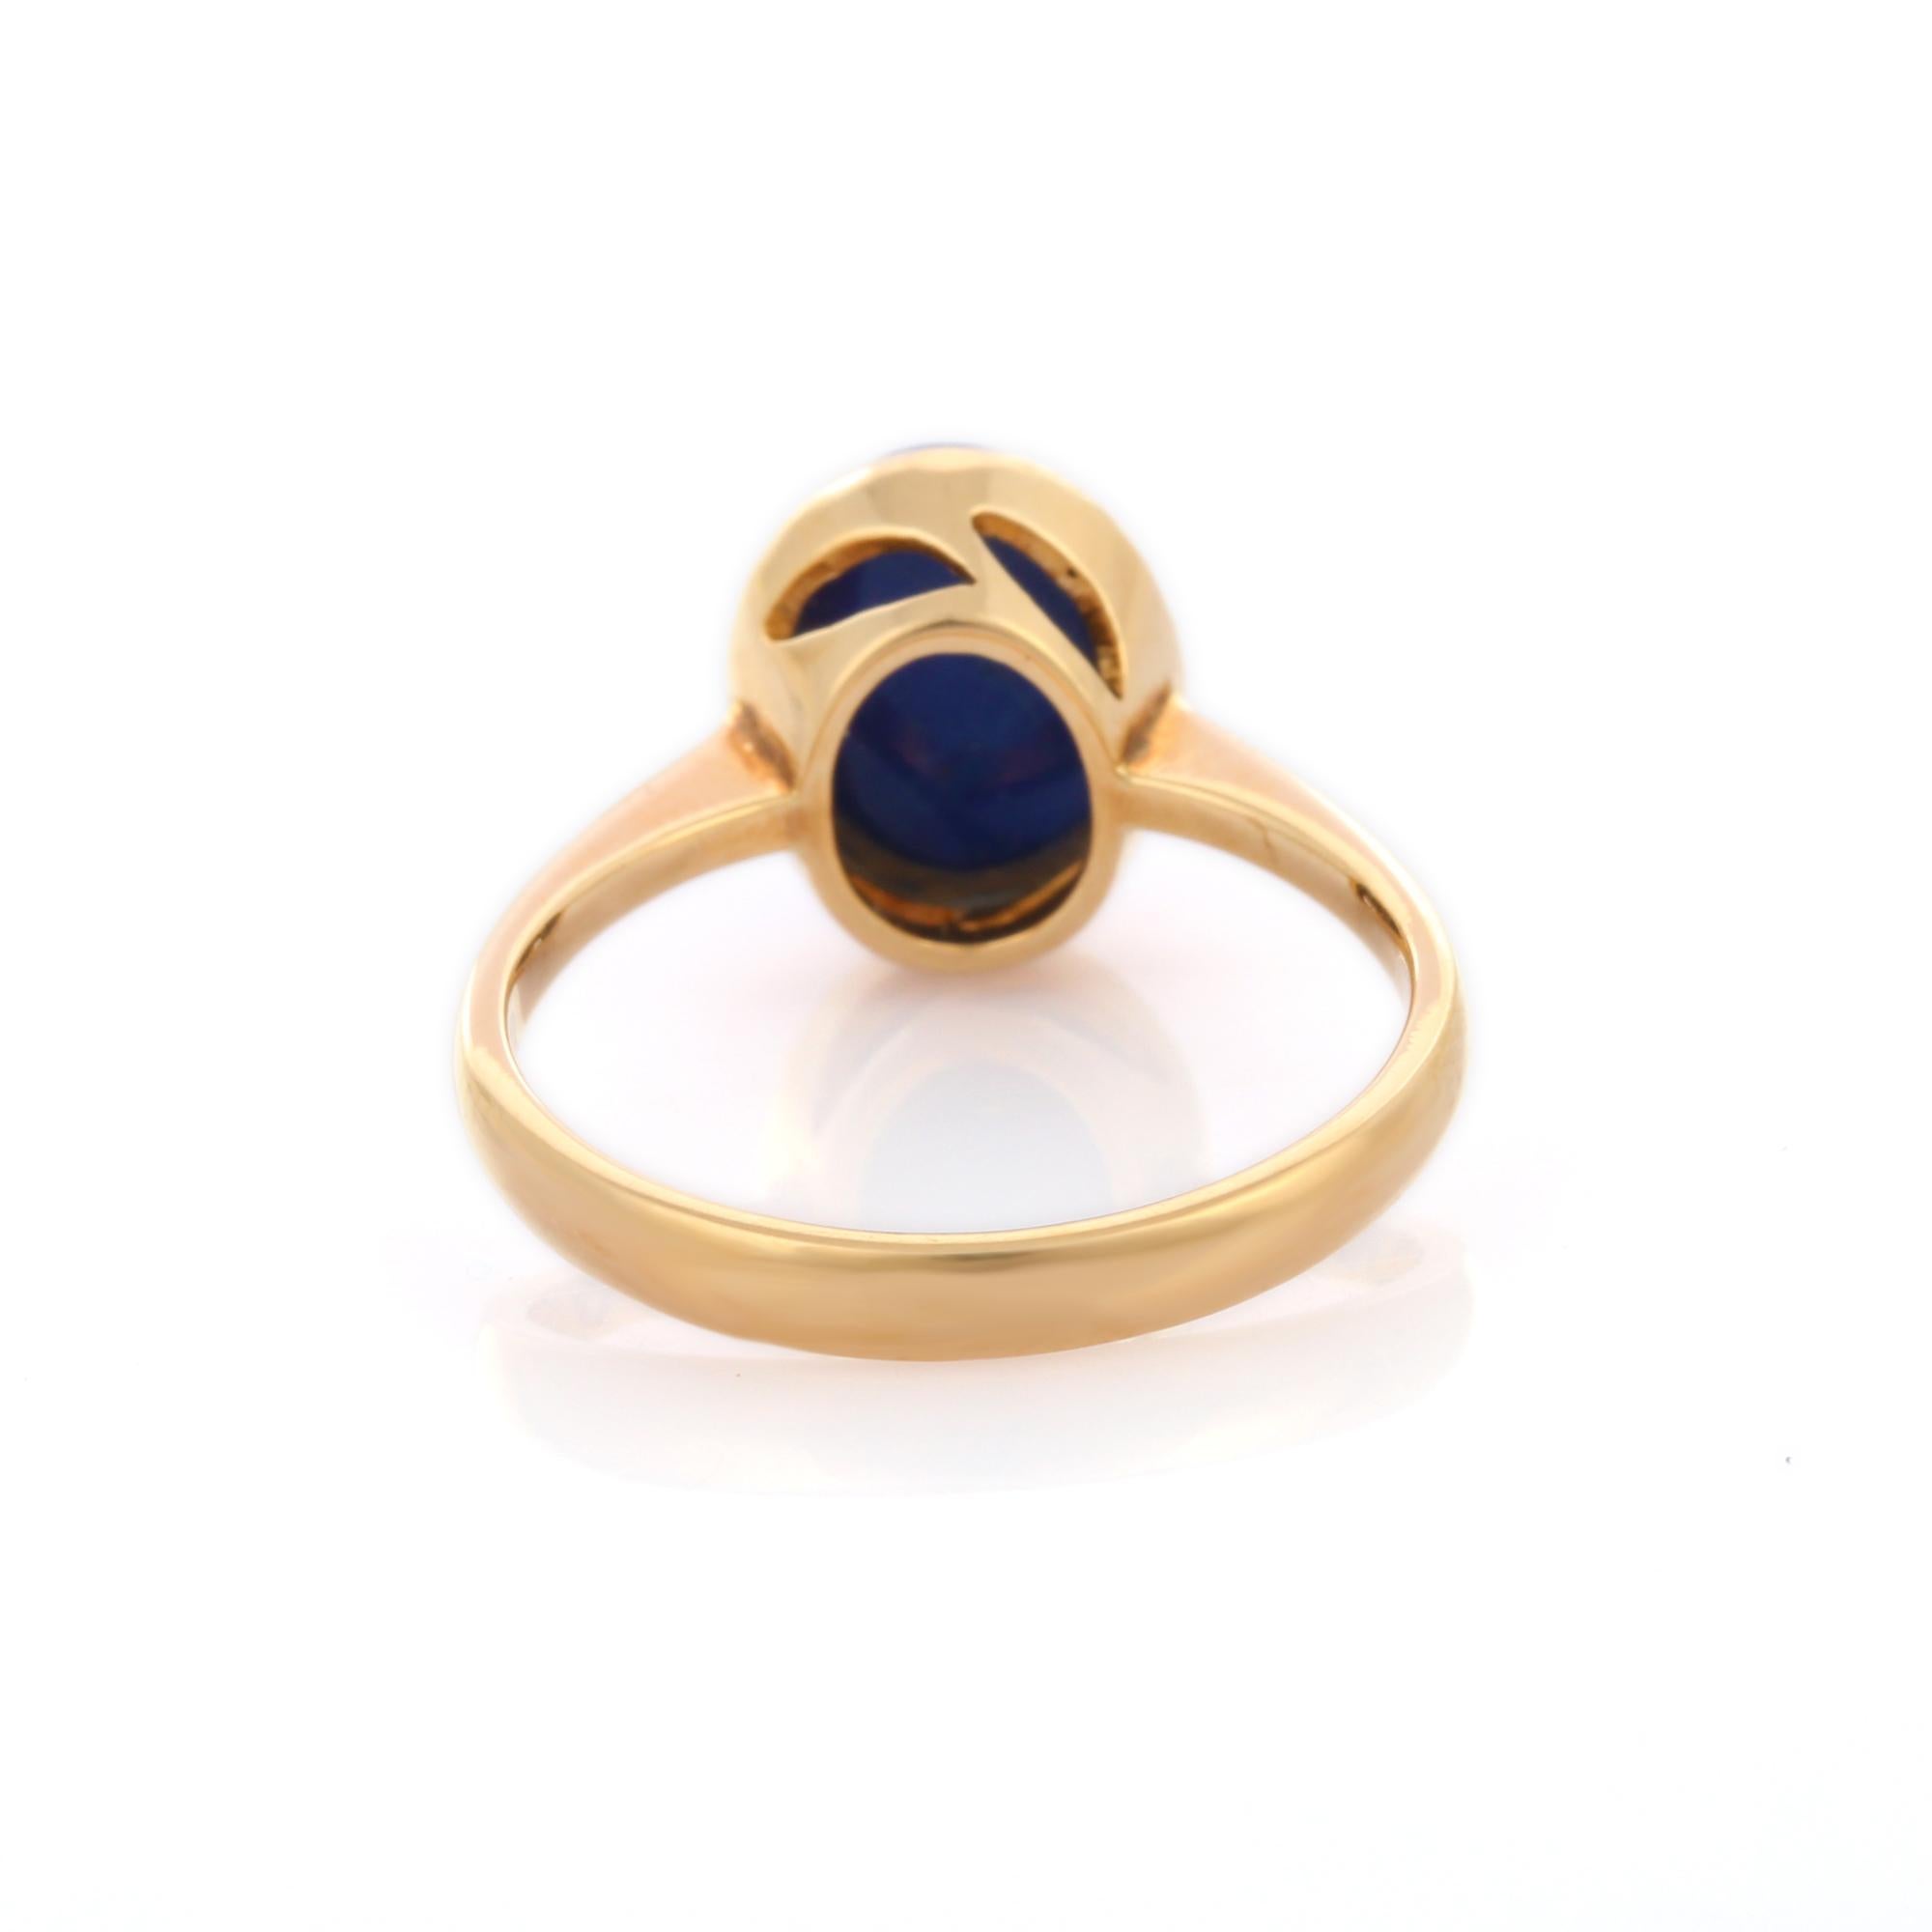 For Sale:  2.87 Carat Lapis Lazuli Solitaire Ring in 18K Yellow Gold  5